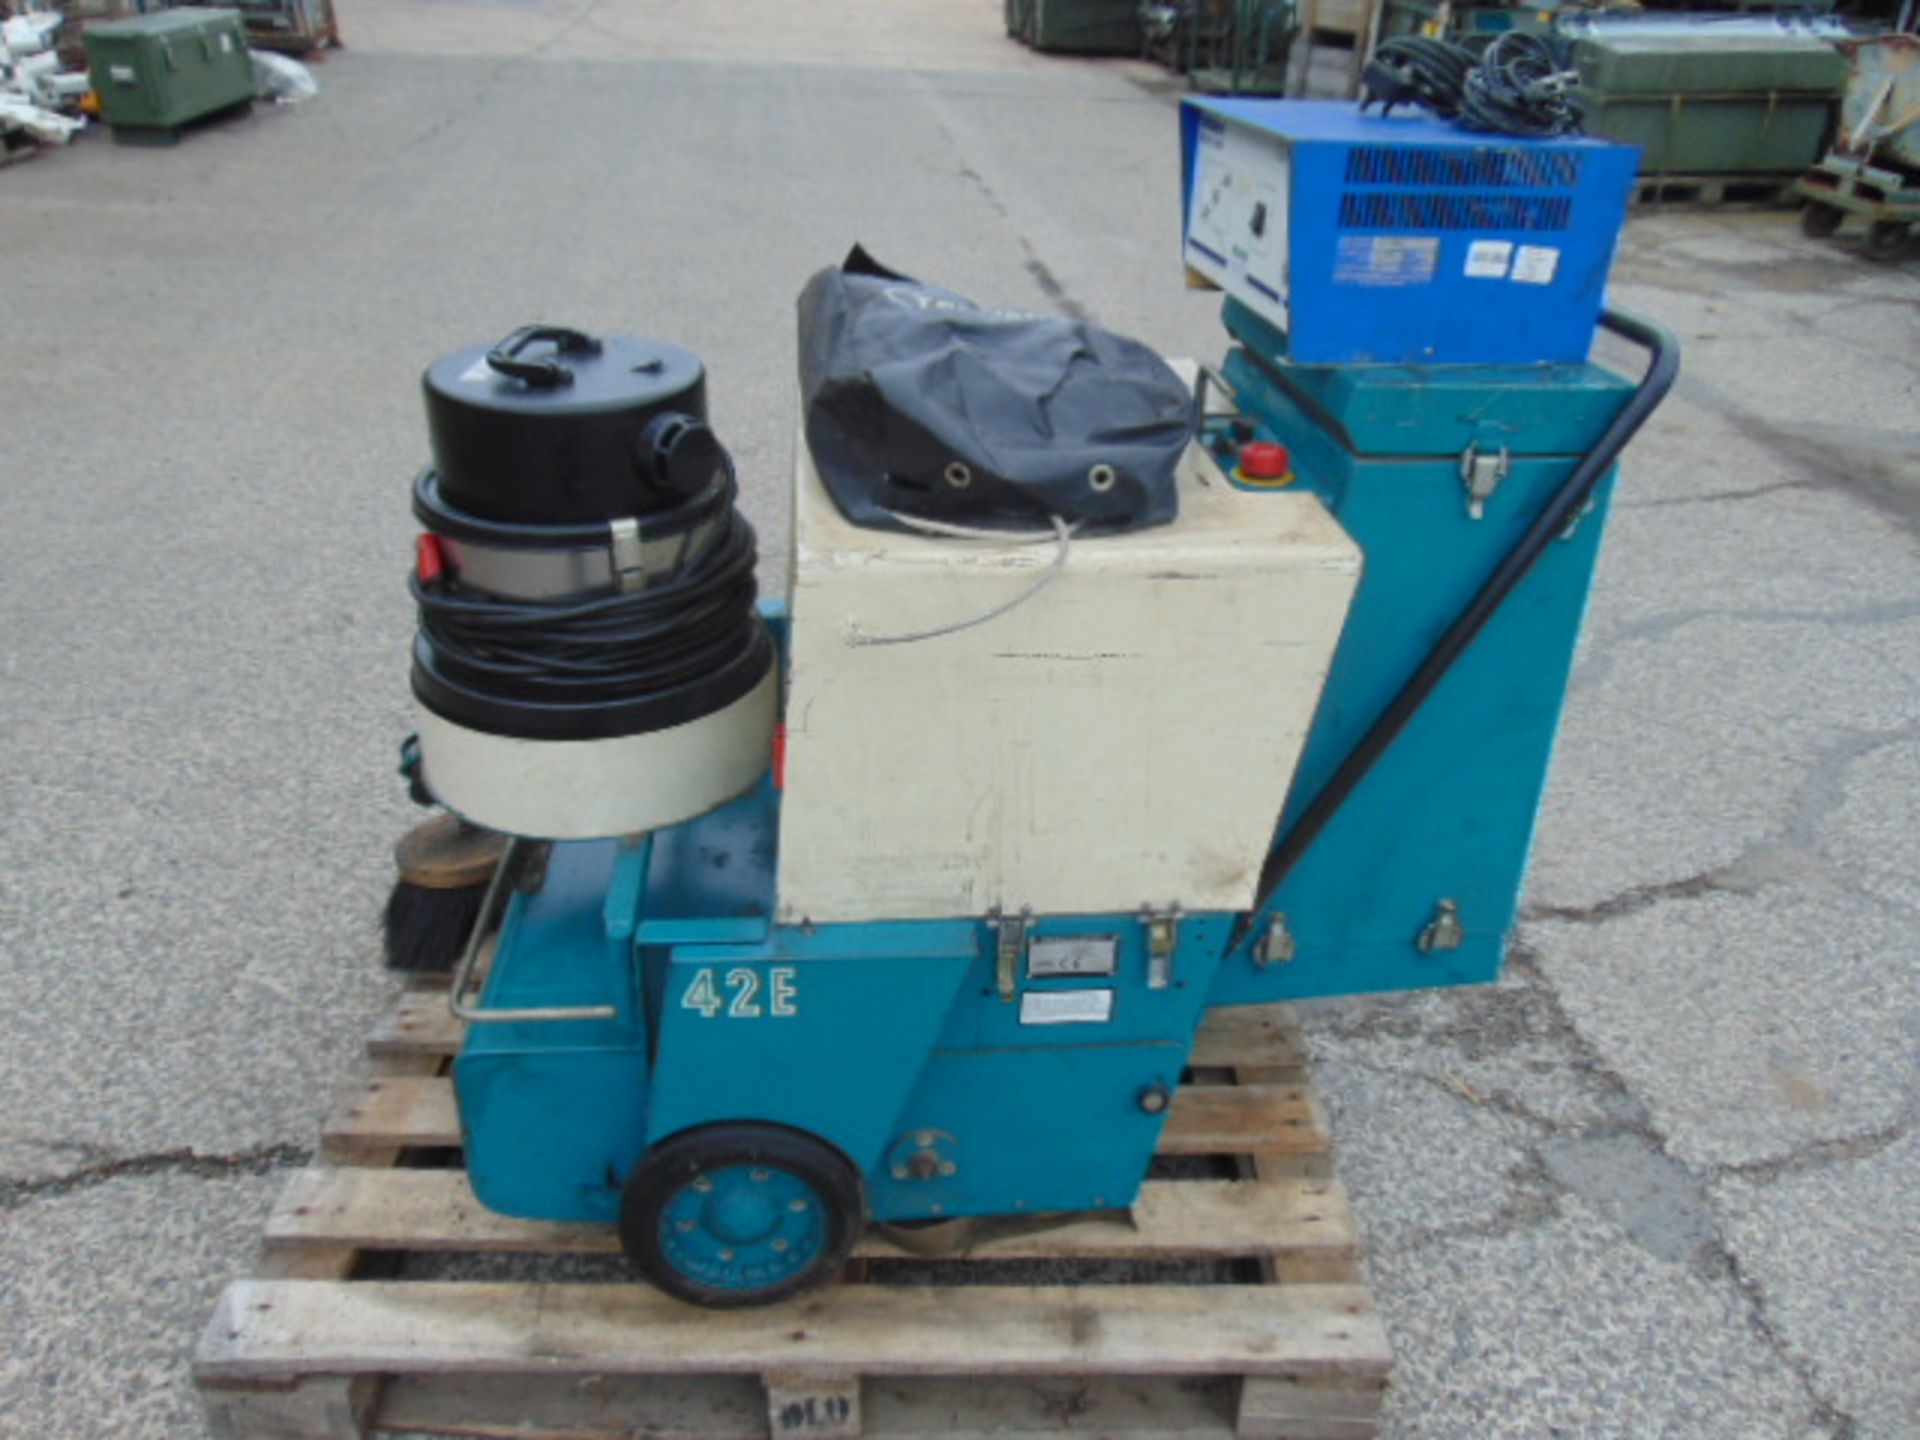 Tennant 42E Walk Behind Electric Sweeper with Vacuum Cleaner C/W Charger - Image 4 of 12